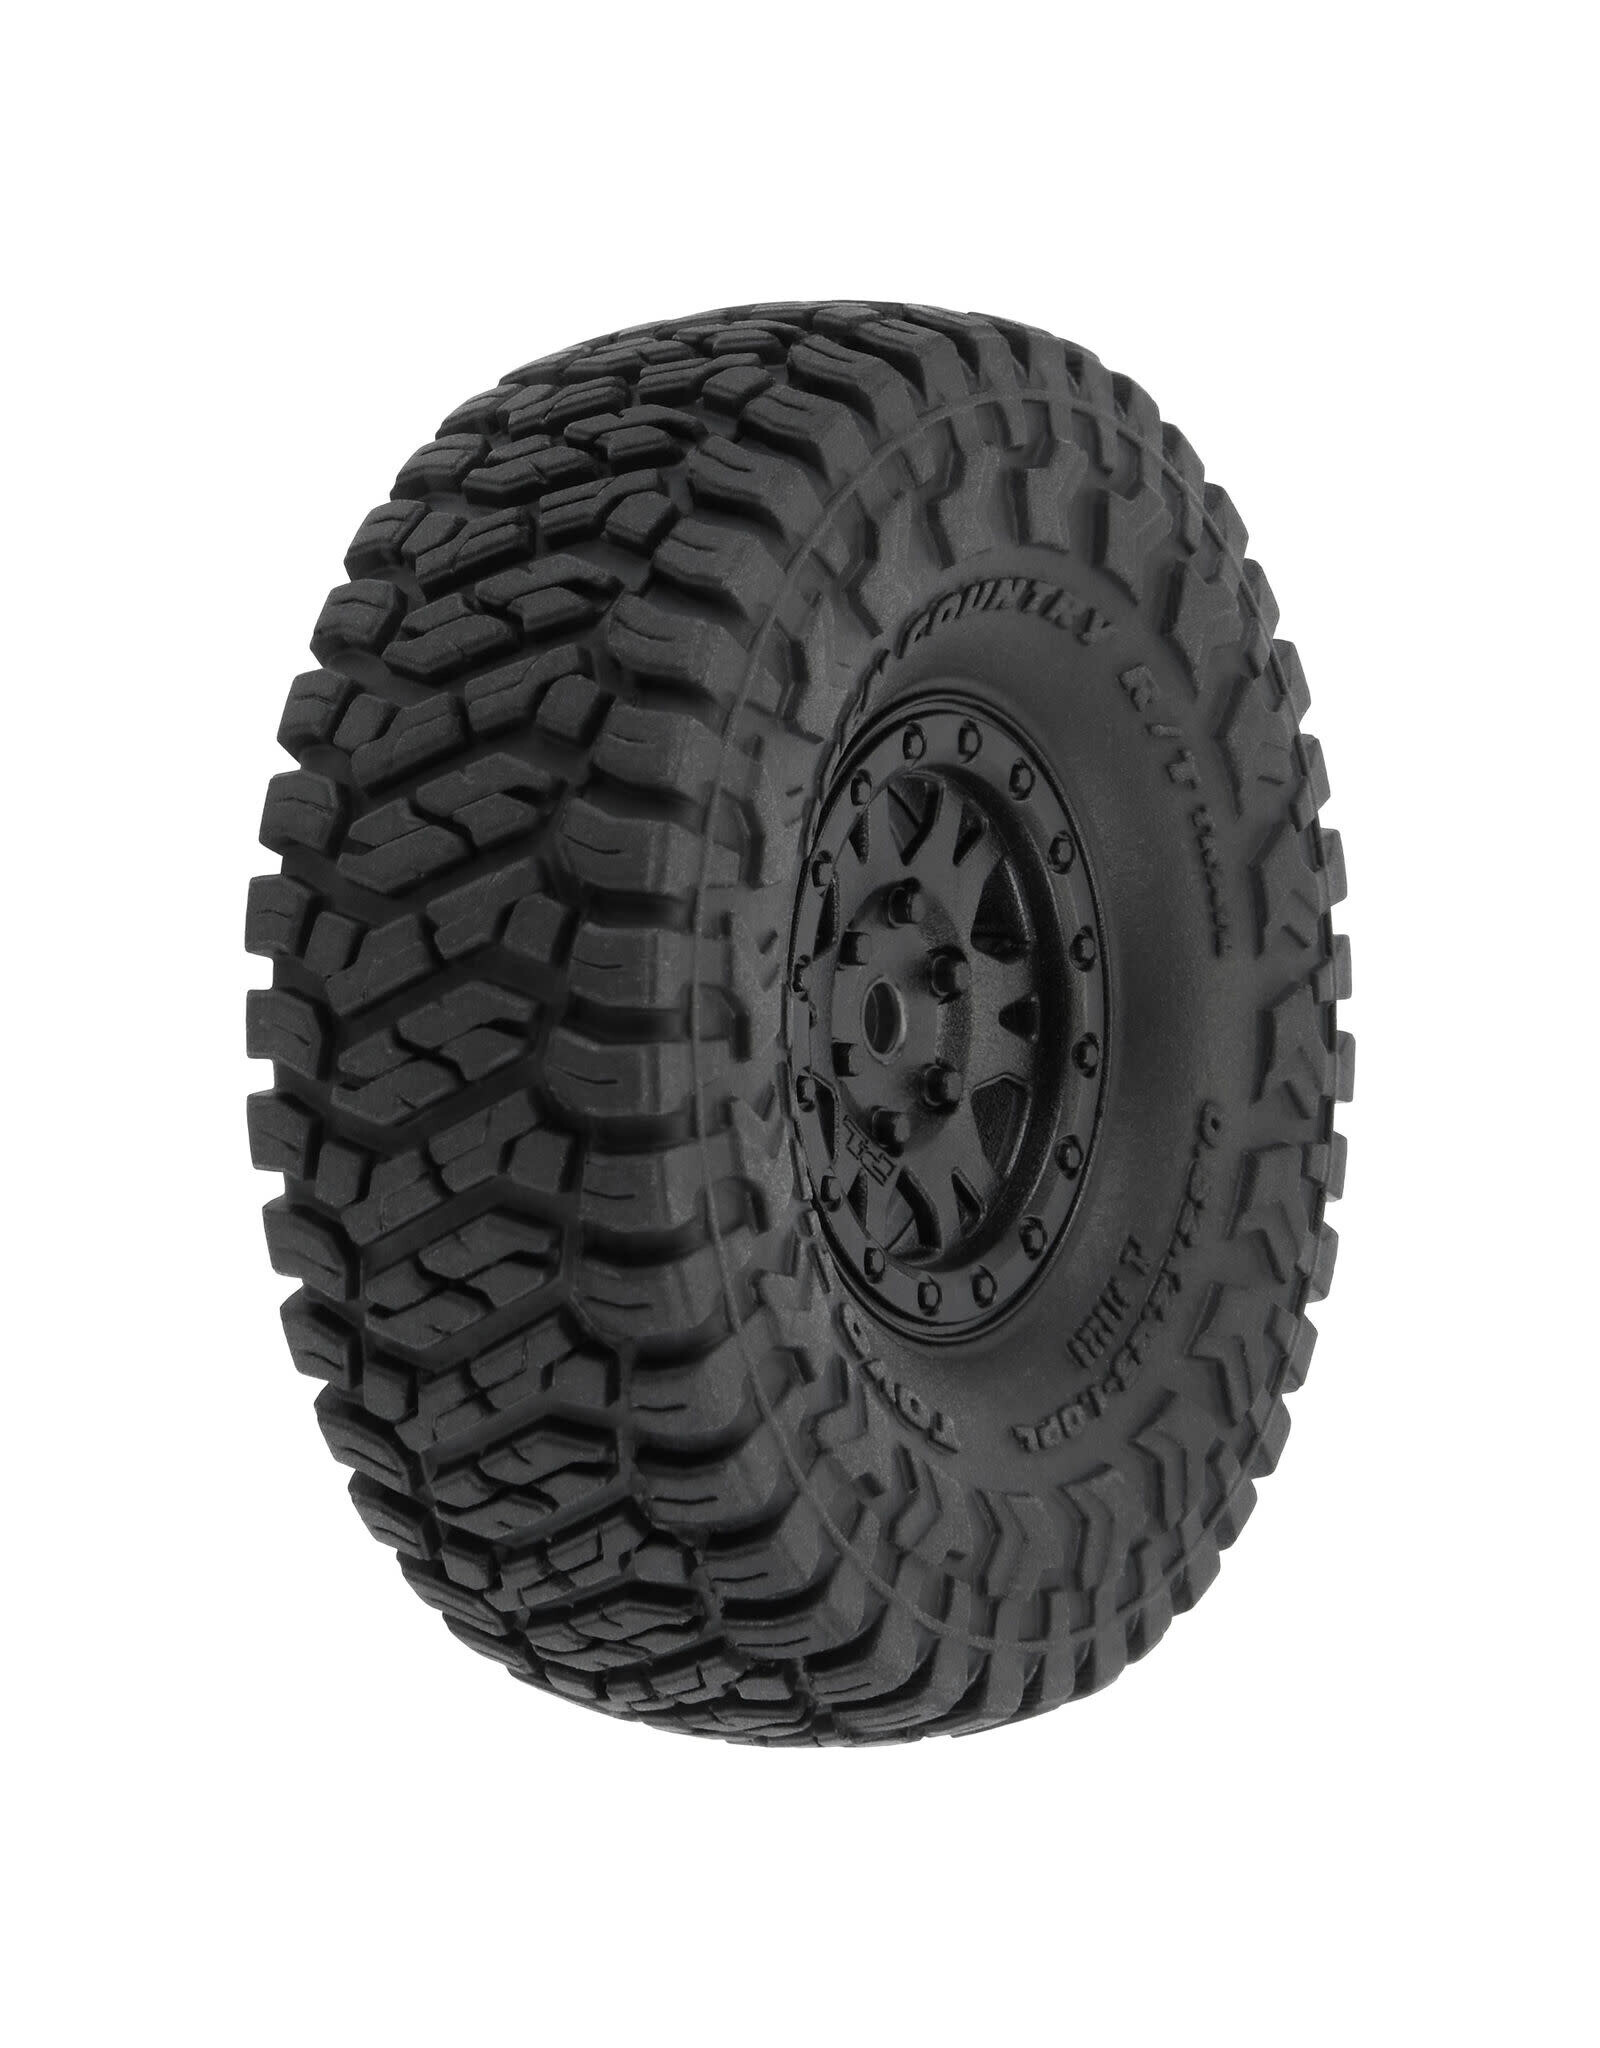 Pro-Line Toyo Open Country R/T Trail 1.0" Tires Mtd Bead-Loc 7mm Hex (4) SCX24